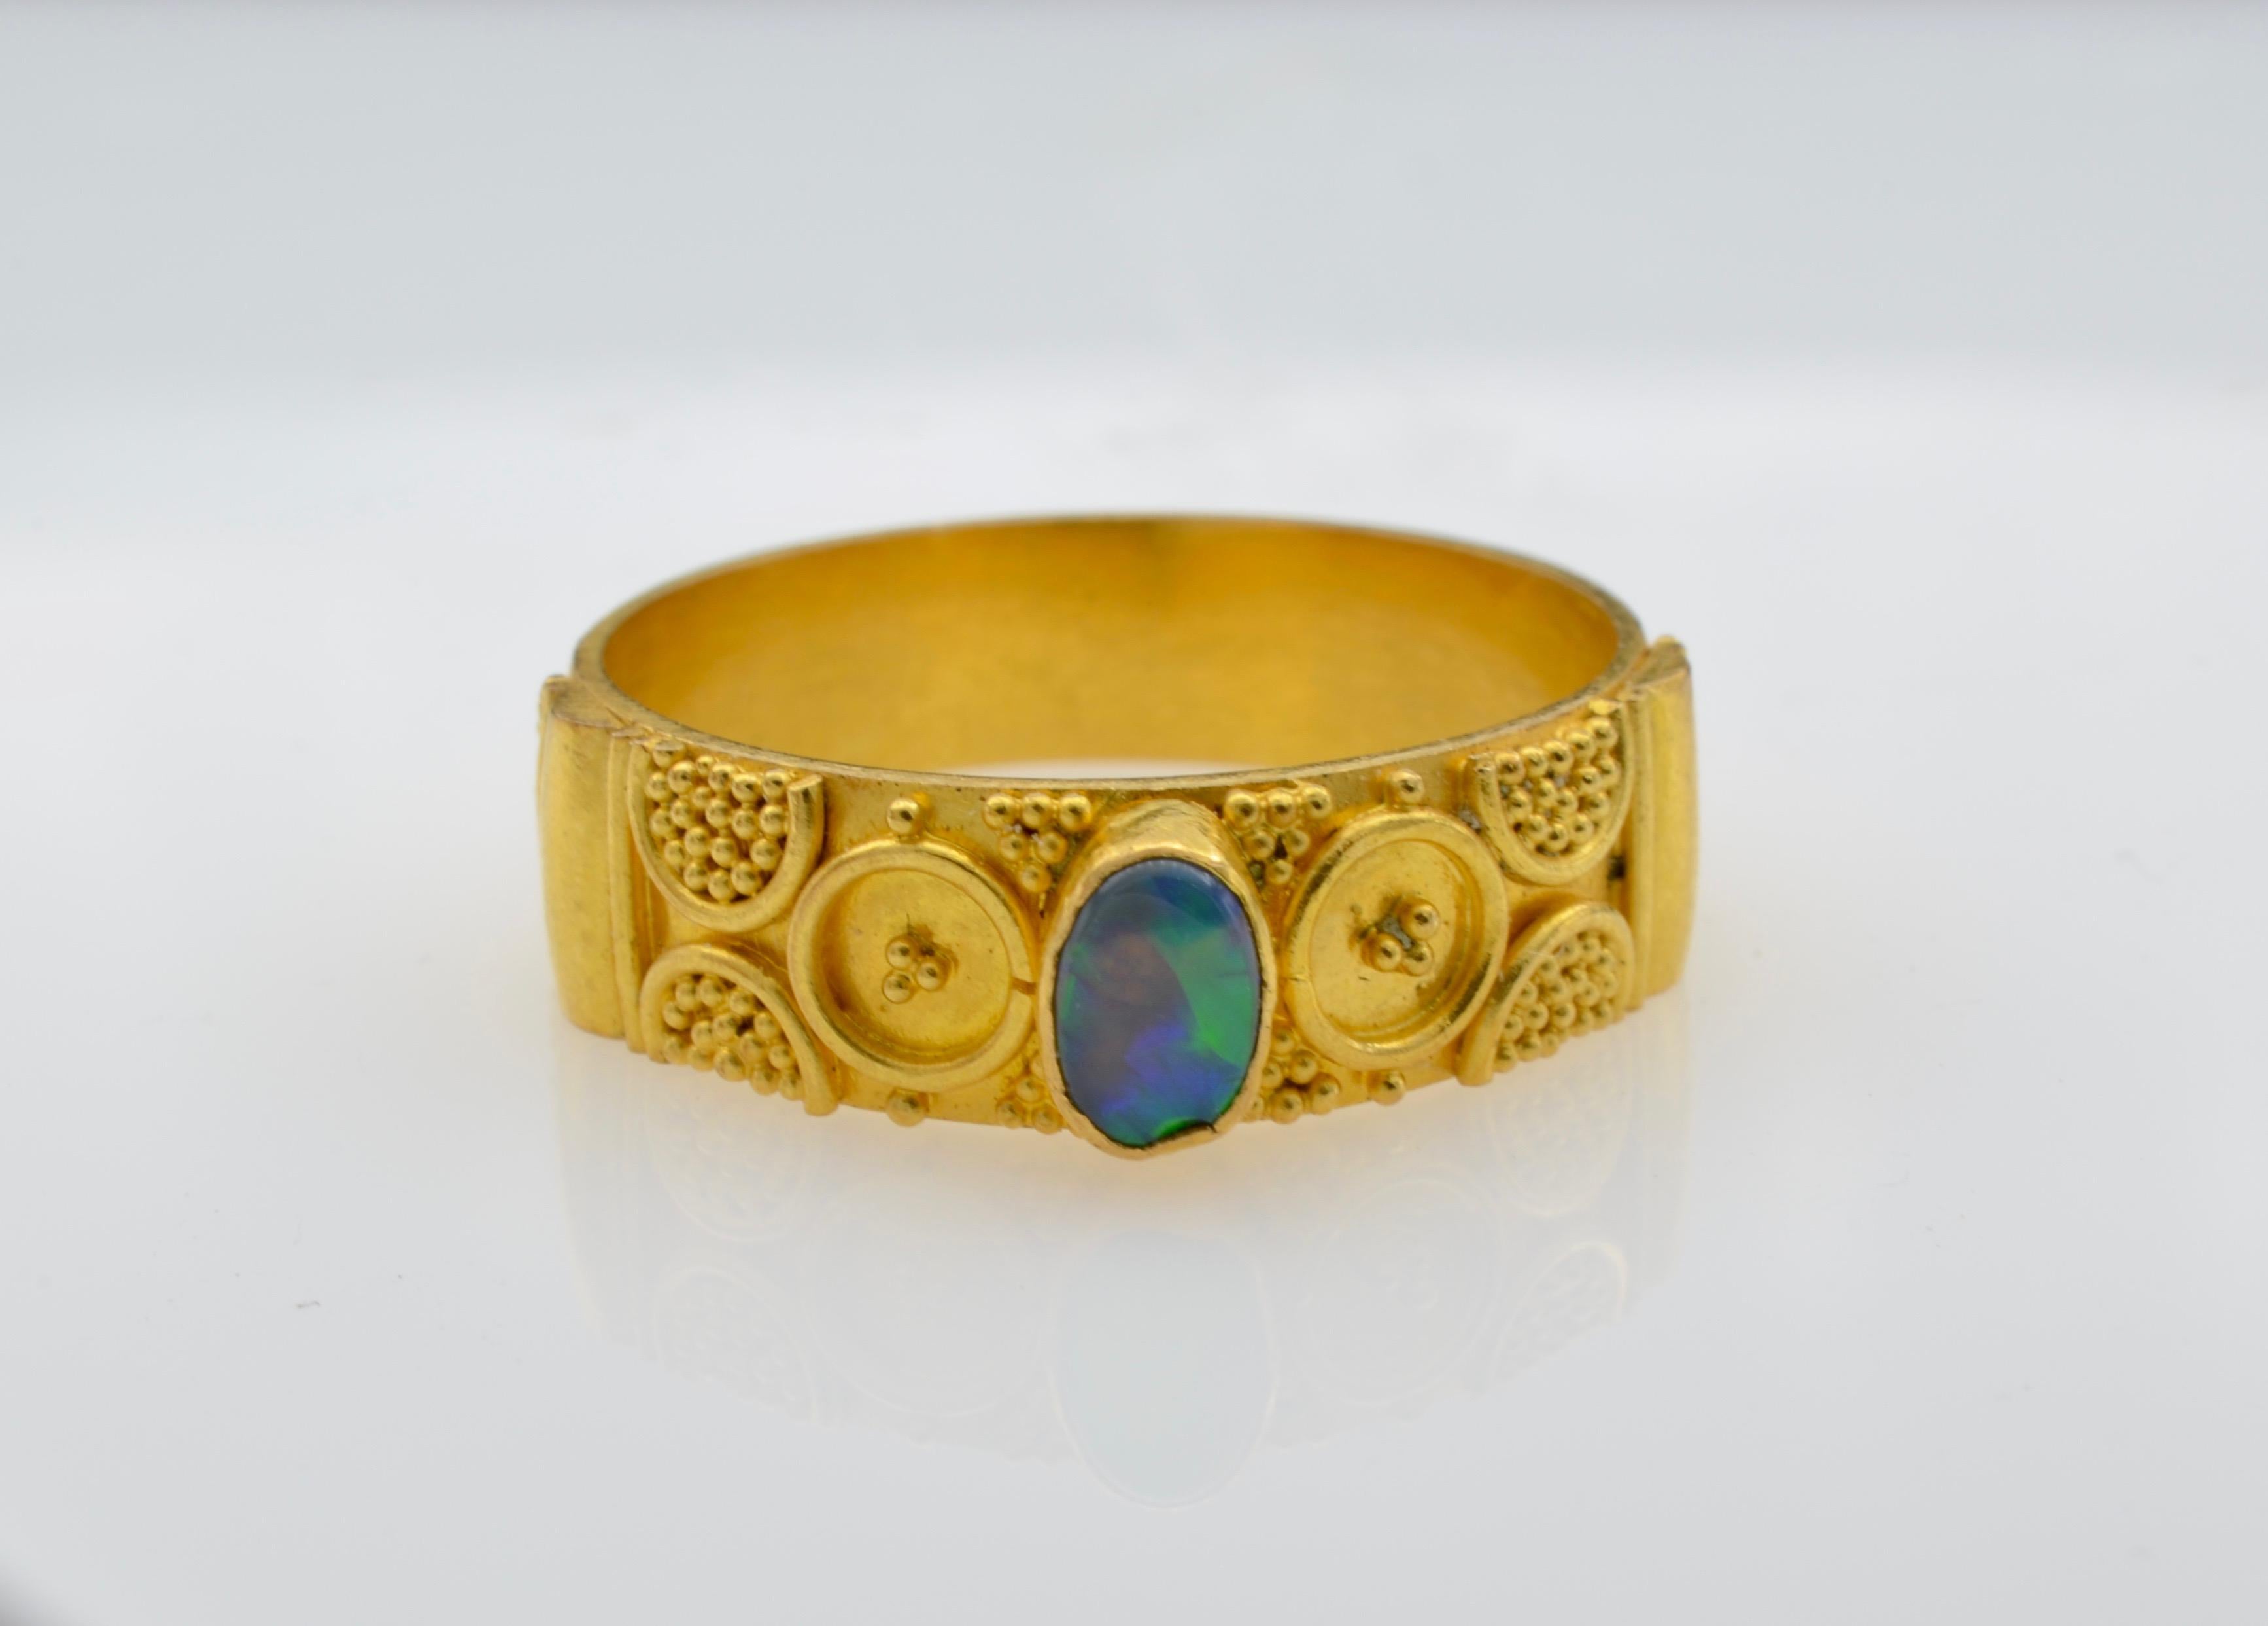 This simple and stunning 22k gold band has a whimsical granular design. The bright yellow of the 22 k gold beautifully accents the oval opal. The ring is a size 6 1/2 and can be sized to fit your finger.